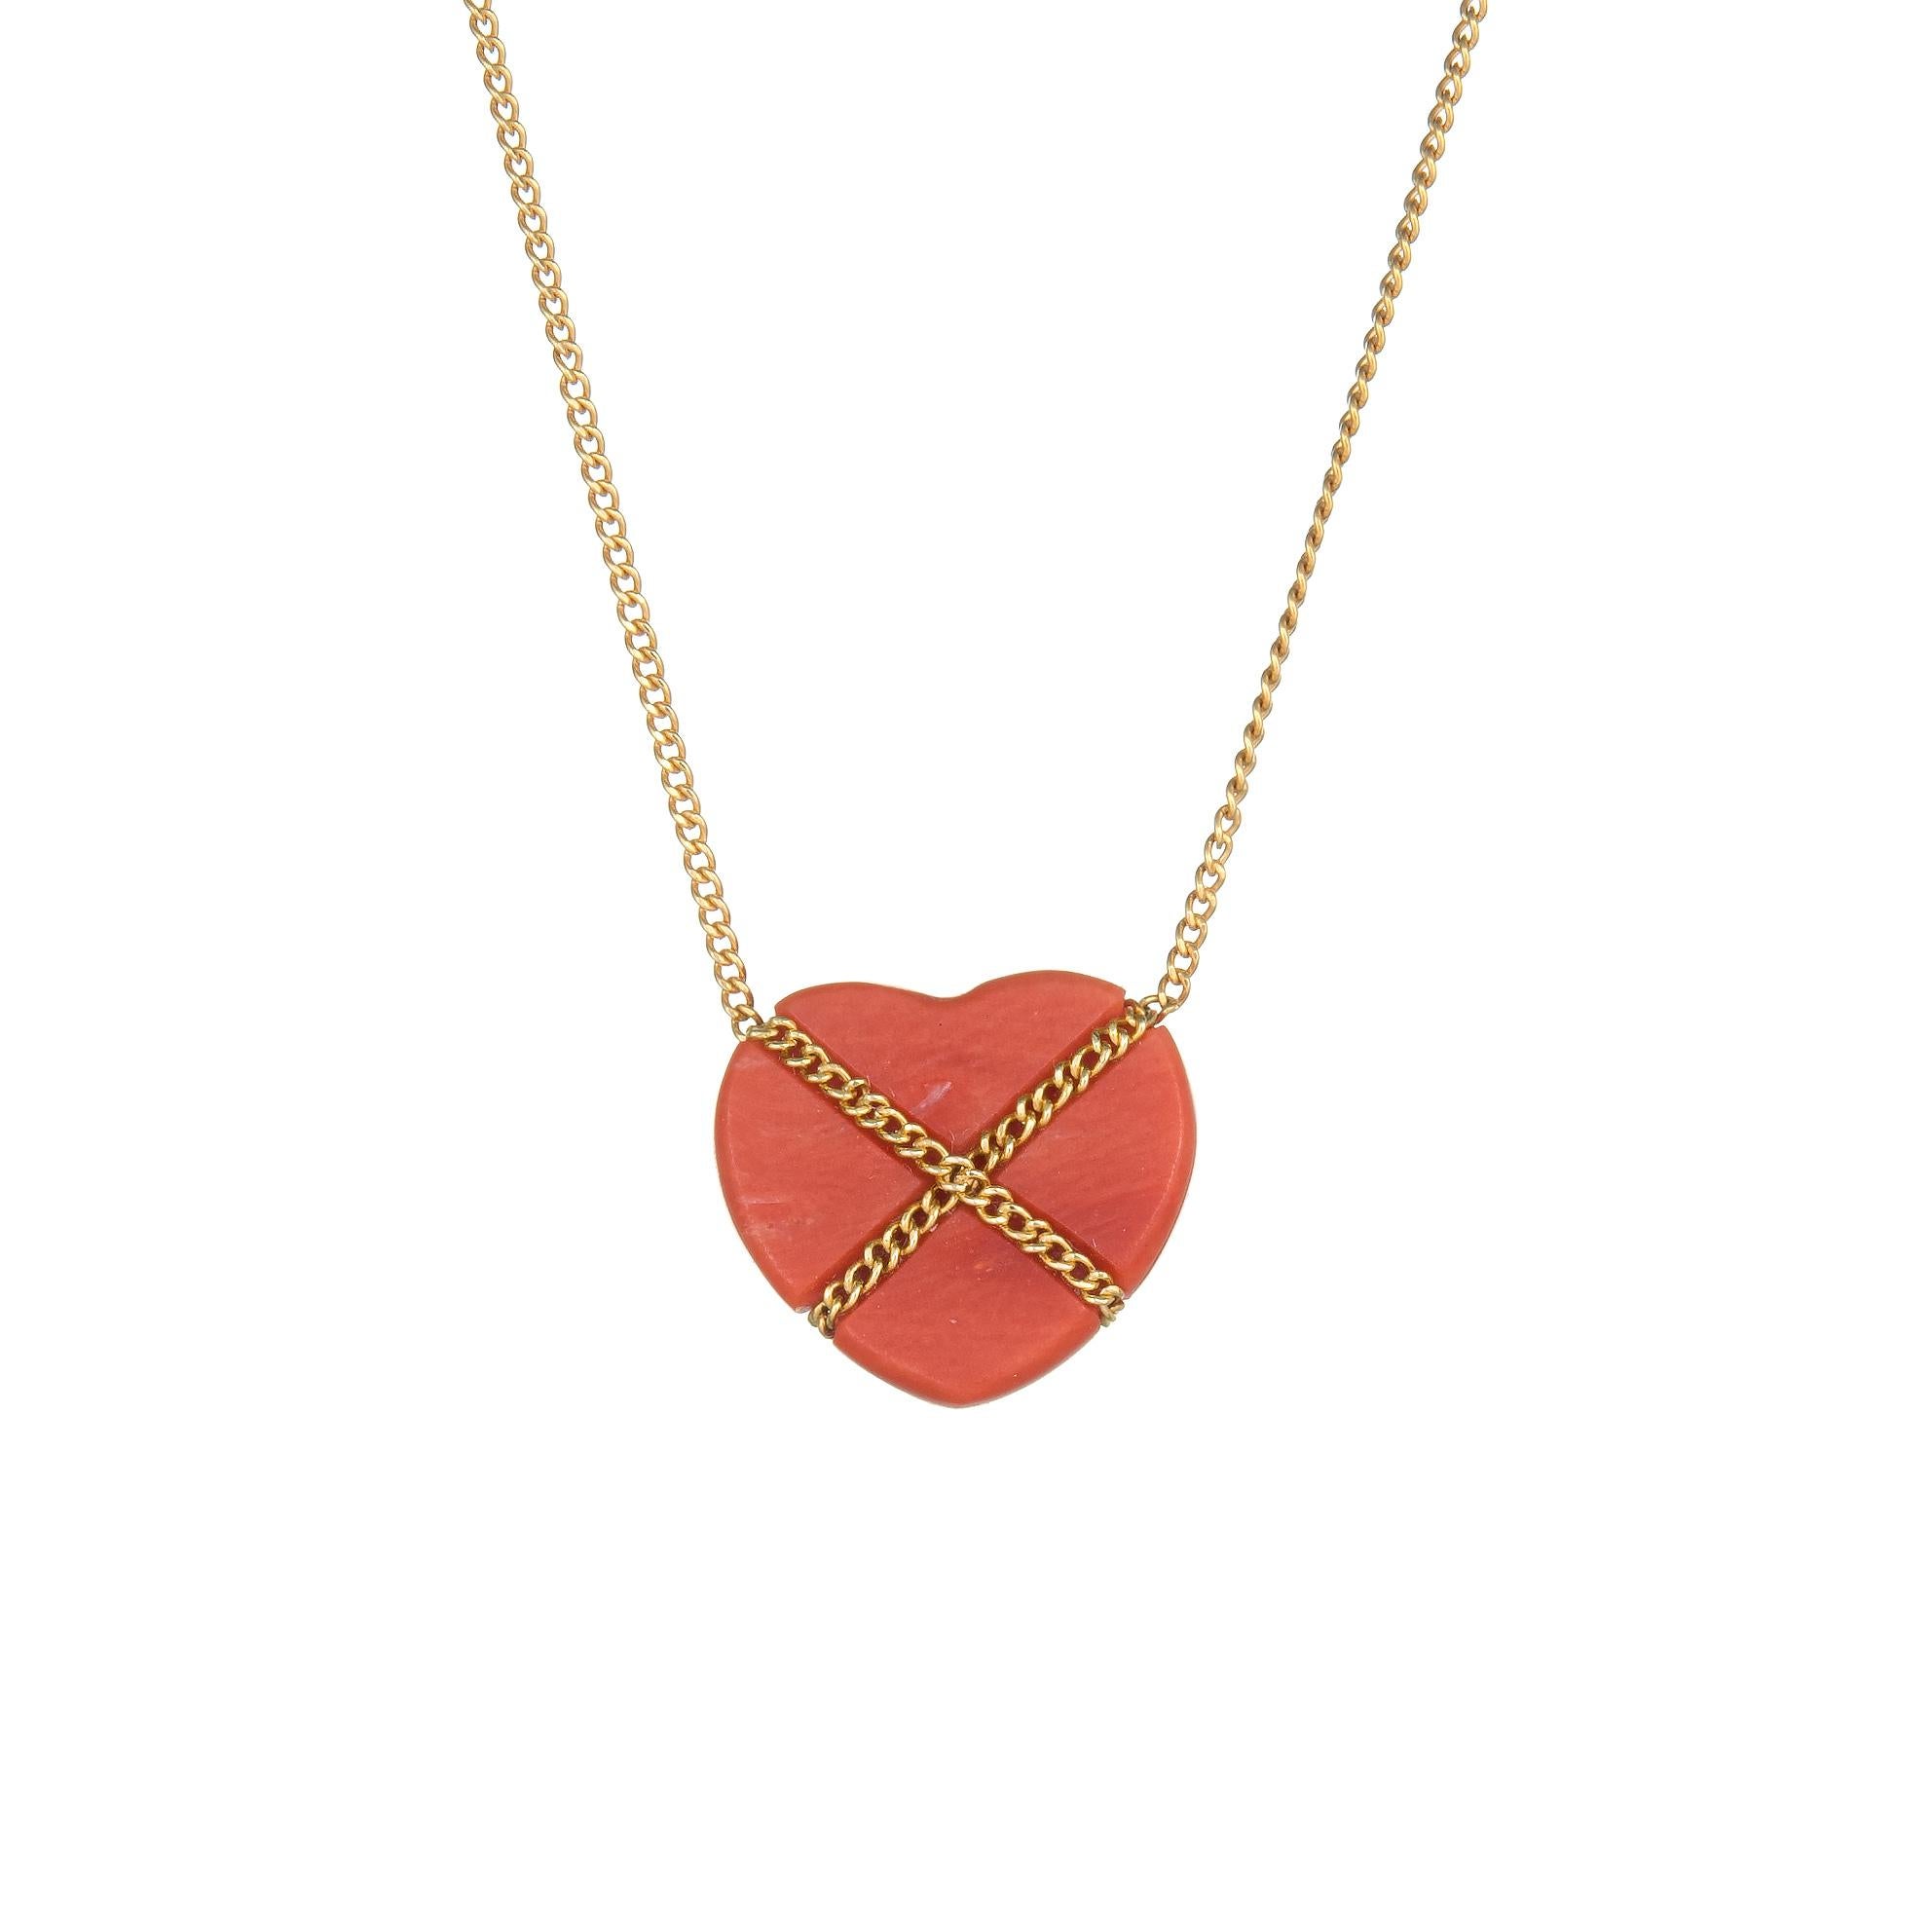 Elegant and finely detailed vintage Tiffany & Co coral Cross My Heart necklace, crafted in 18 karat yellow gold.  

Coral is set into the necklace and measures 14mm x 13mm. The coral is in excellent condition and free of cracks or chips. 

The